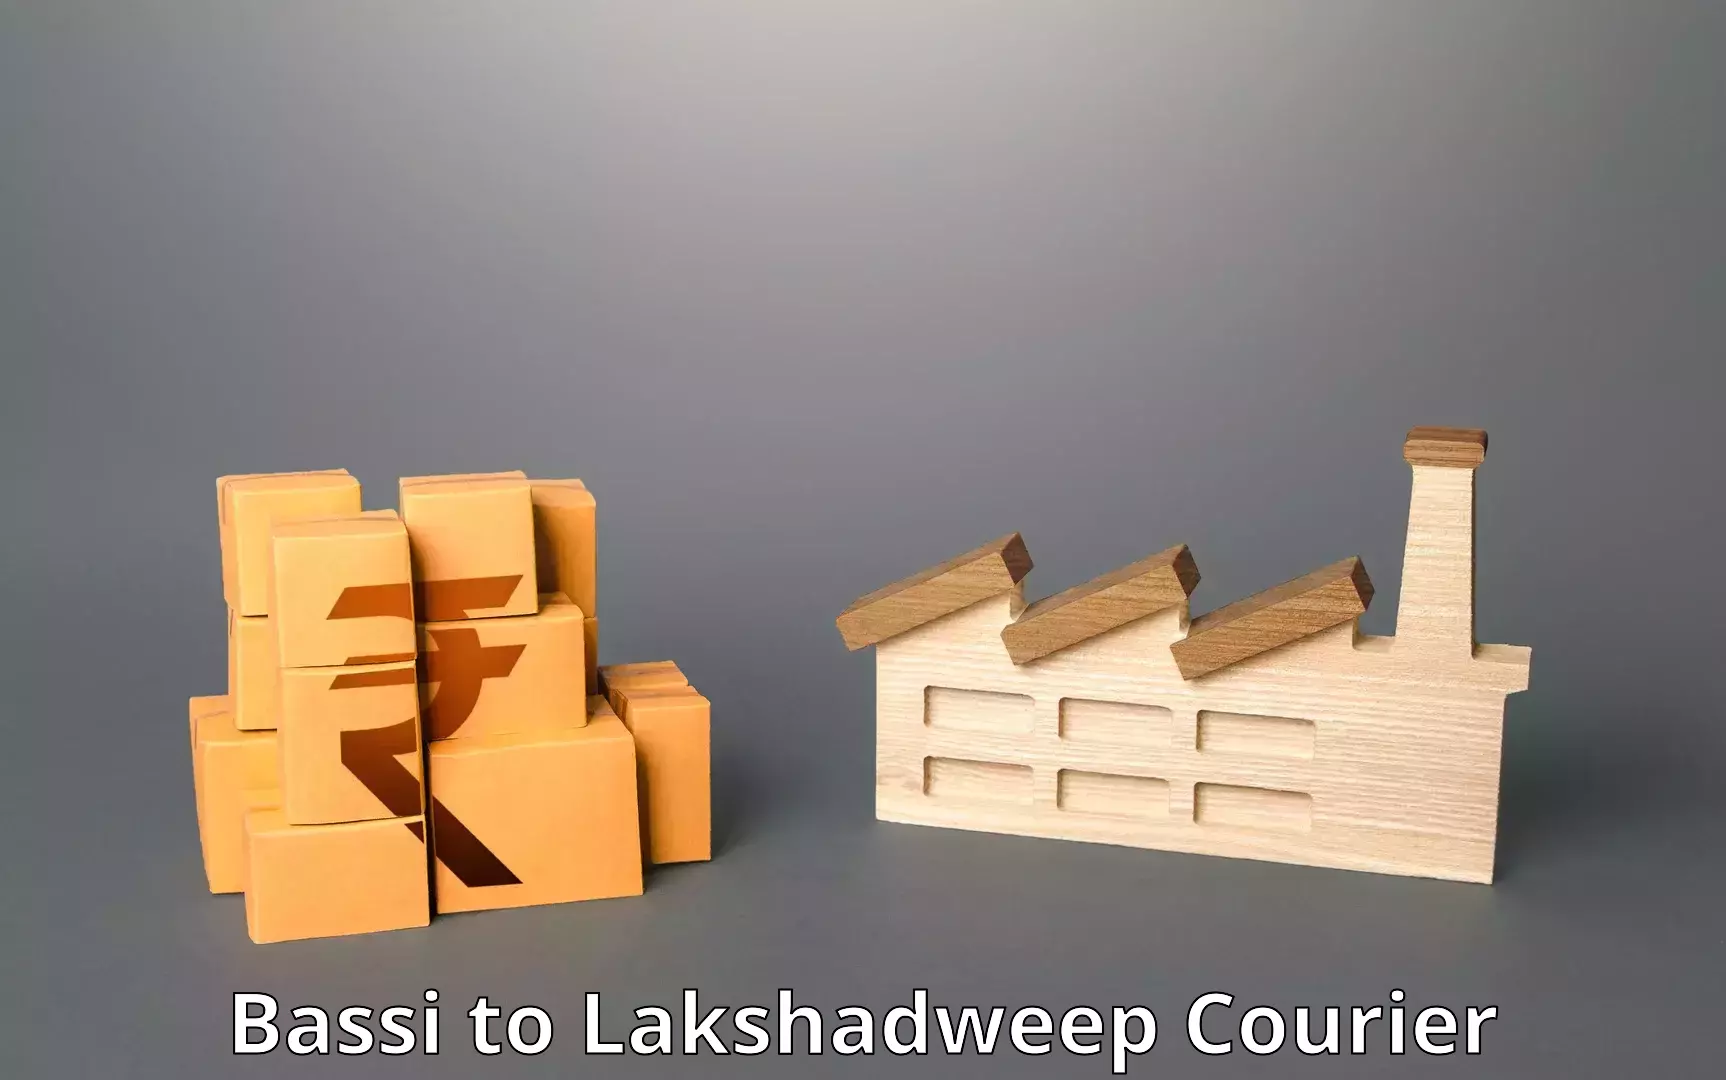 Courier service efficiency in Bassi to Lakshadweep